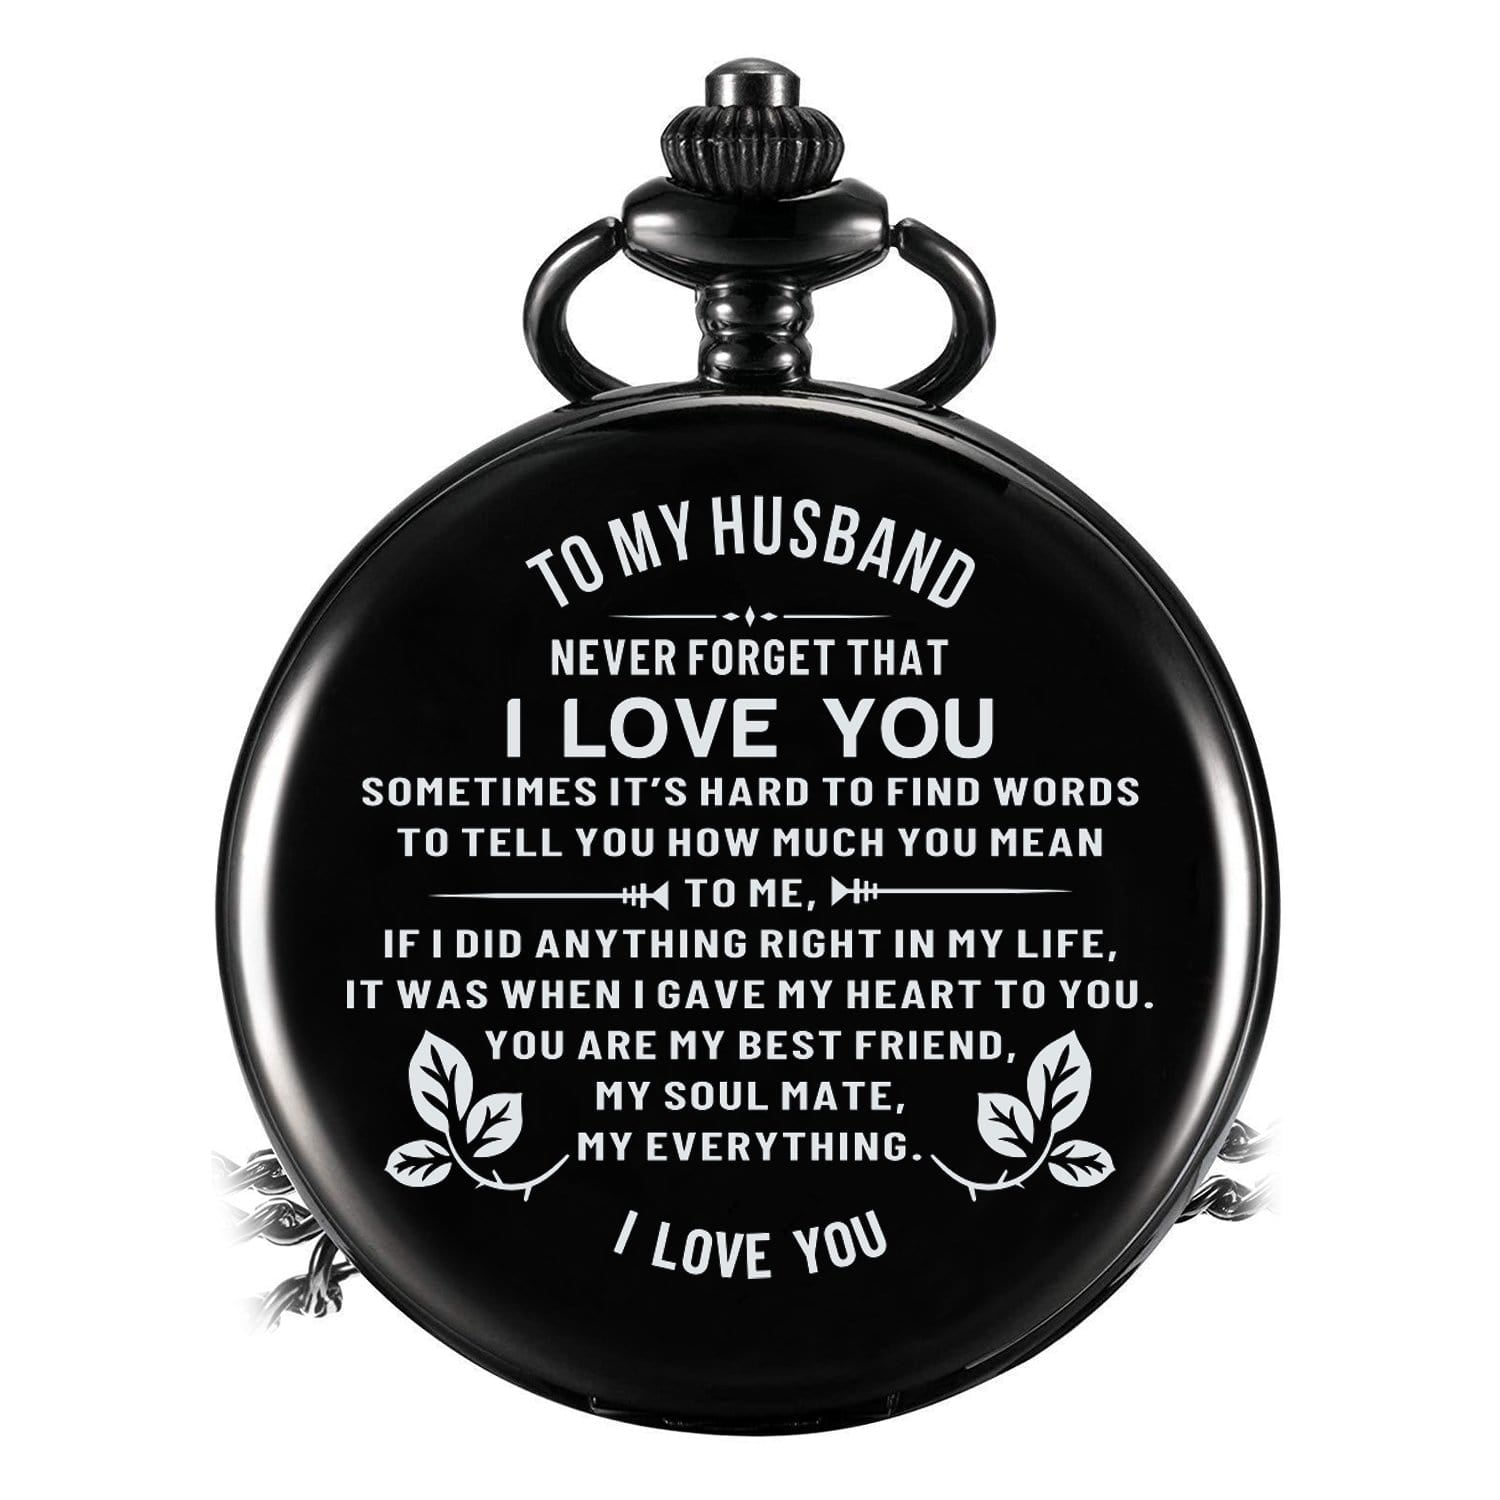 Pocket Watches To My Husband - My Soul Mate My Everything Pocket Watch GiveMe-Gifts